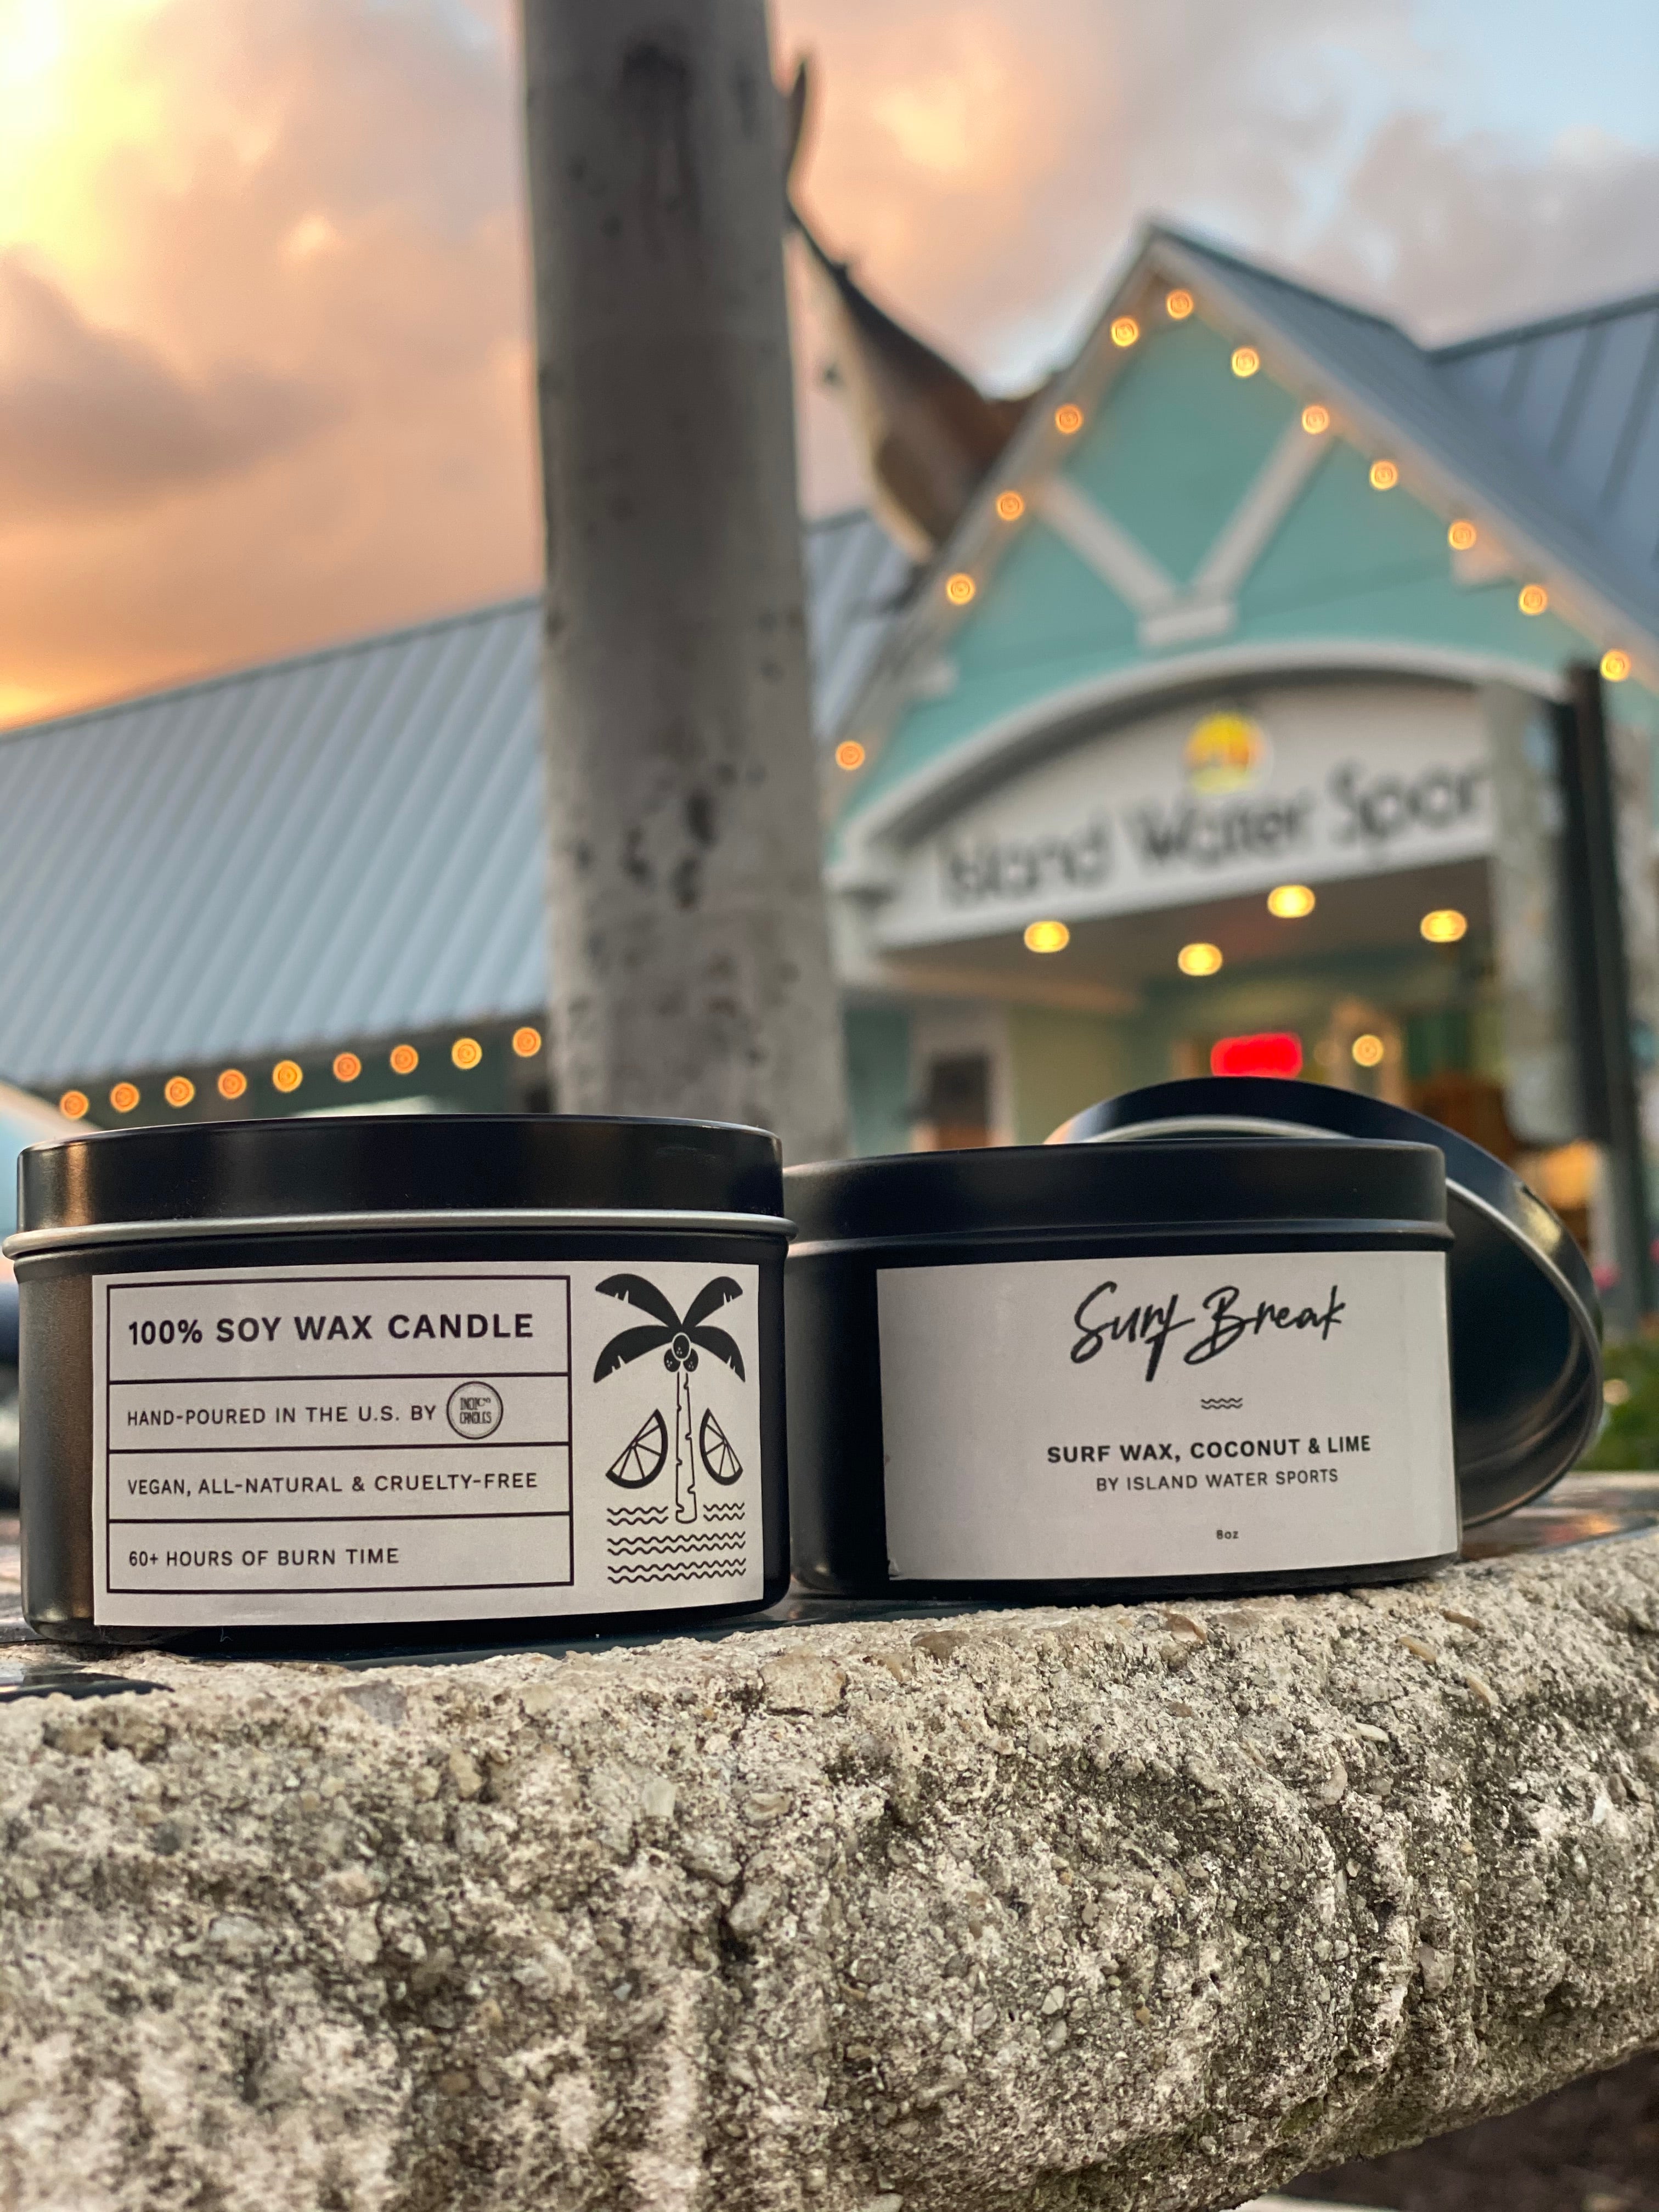 Surf Break Candle surf wax and coconut lime